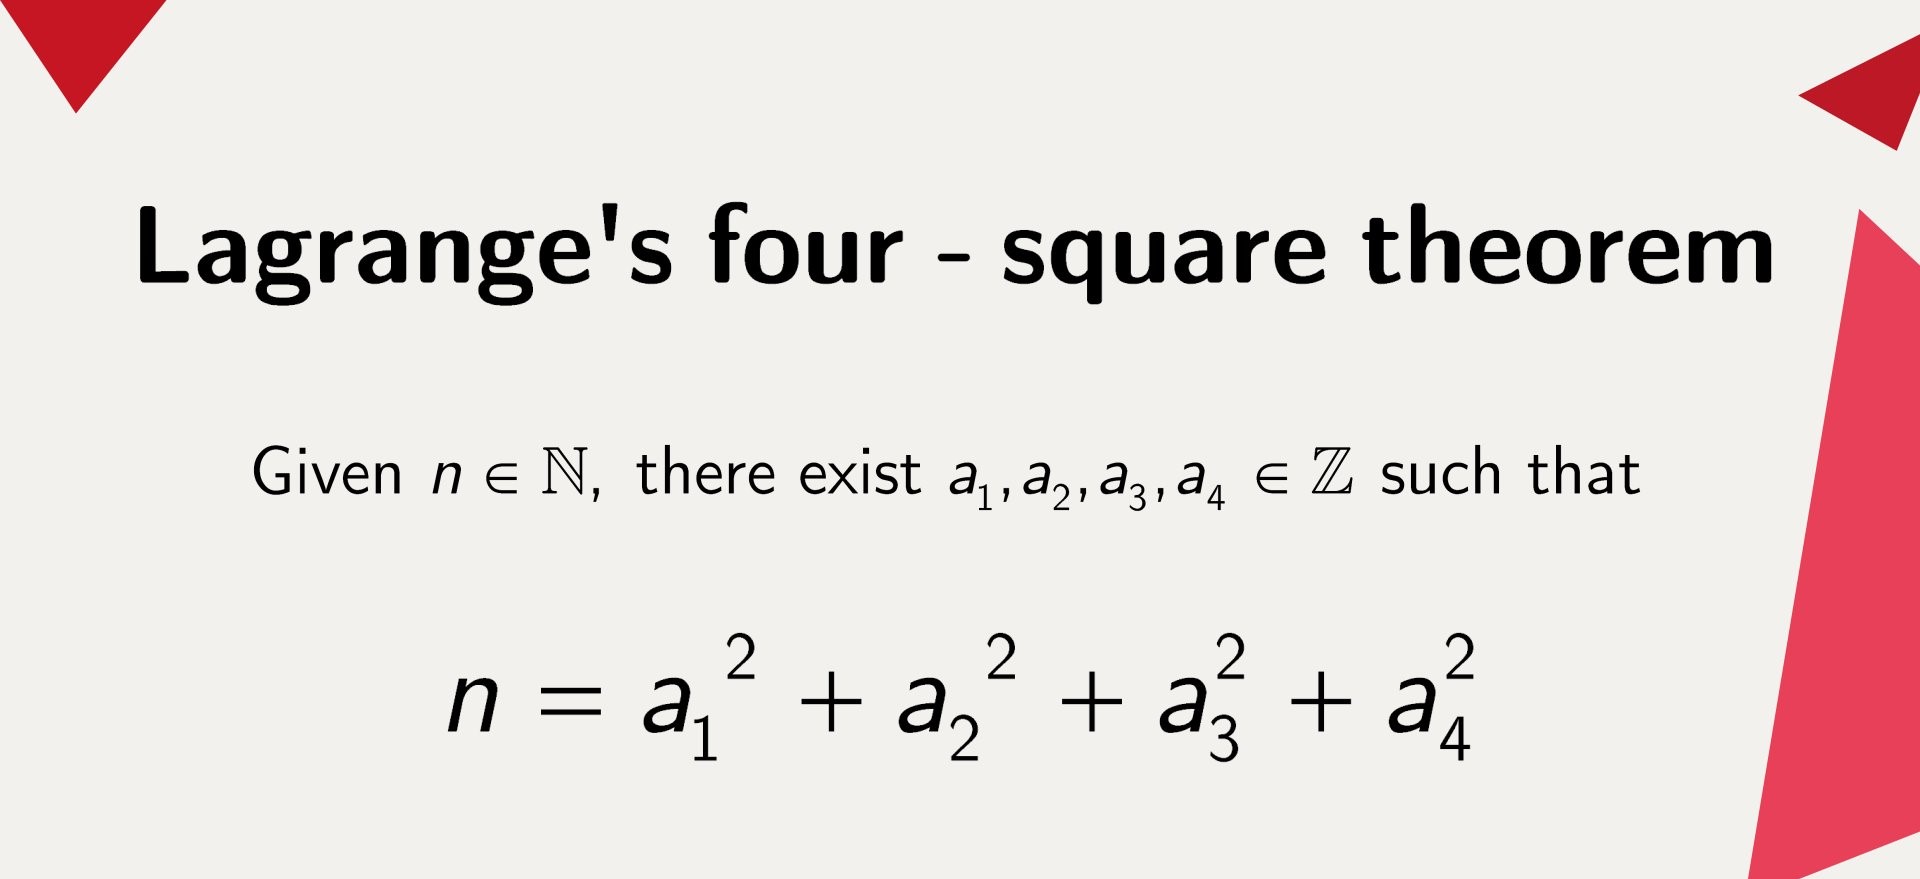 12-facts-you-must-know-about-lagranges-four-square-theorem